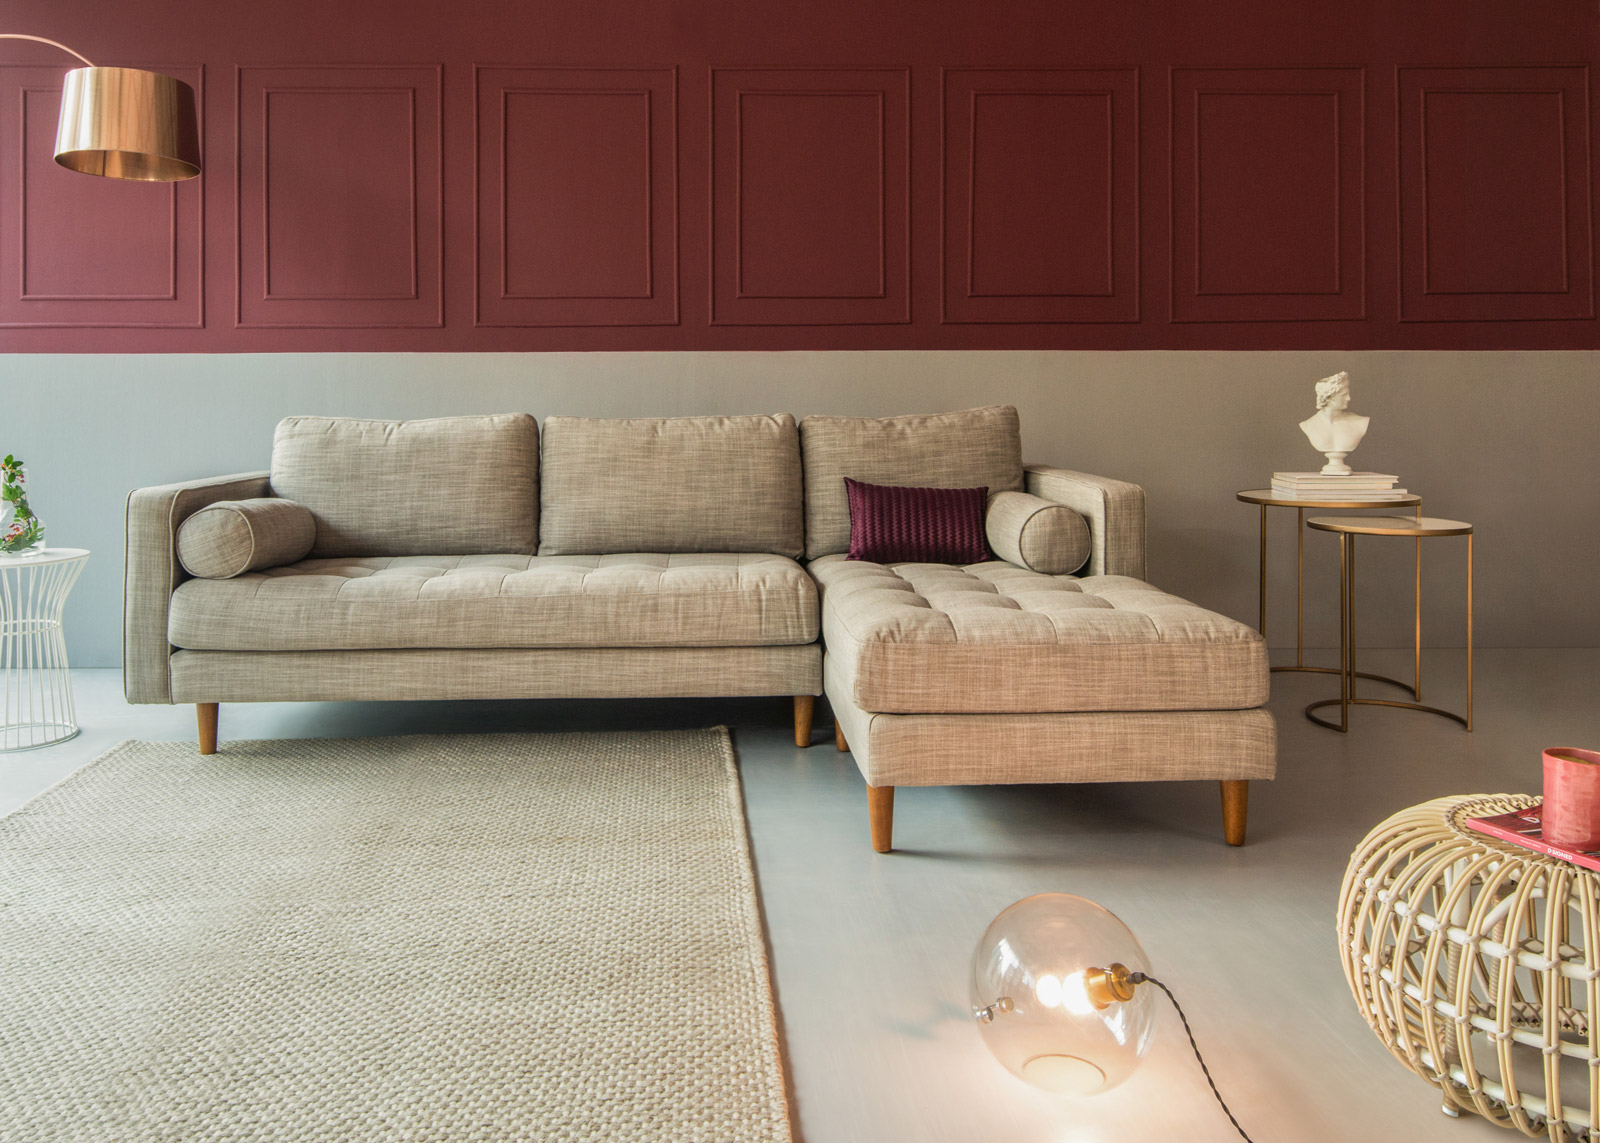 Eye catching statement colour for living room interiors - Beautiful Homes